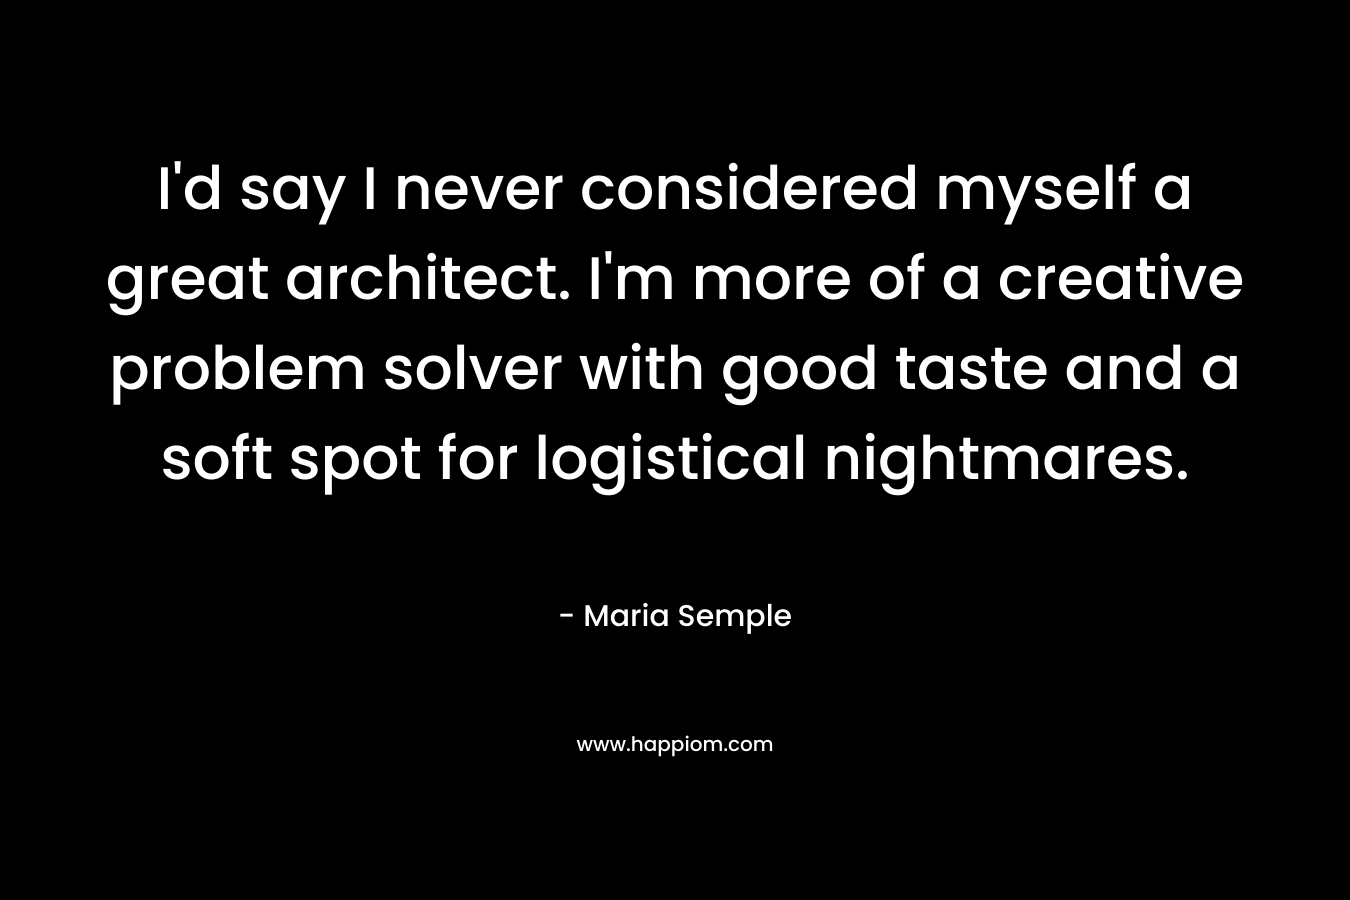 I’d say I never considered myself a great architect. I’m more of a creative problem solver with good taste and a soft spot for logistical nightmares. – Maria Semple